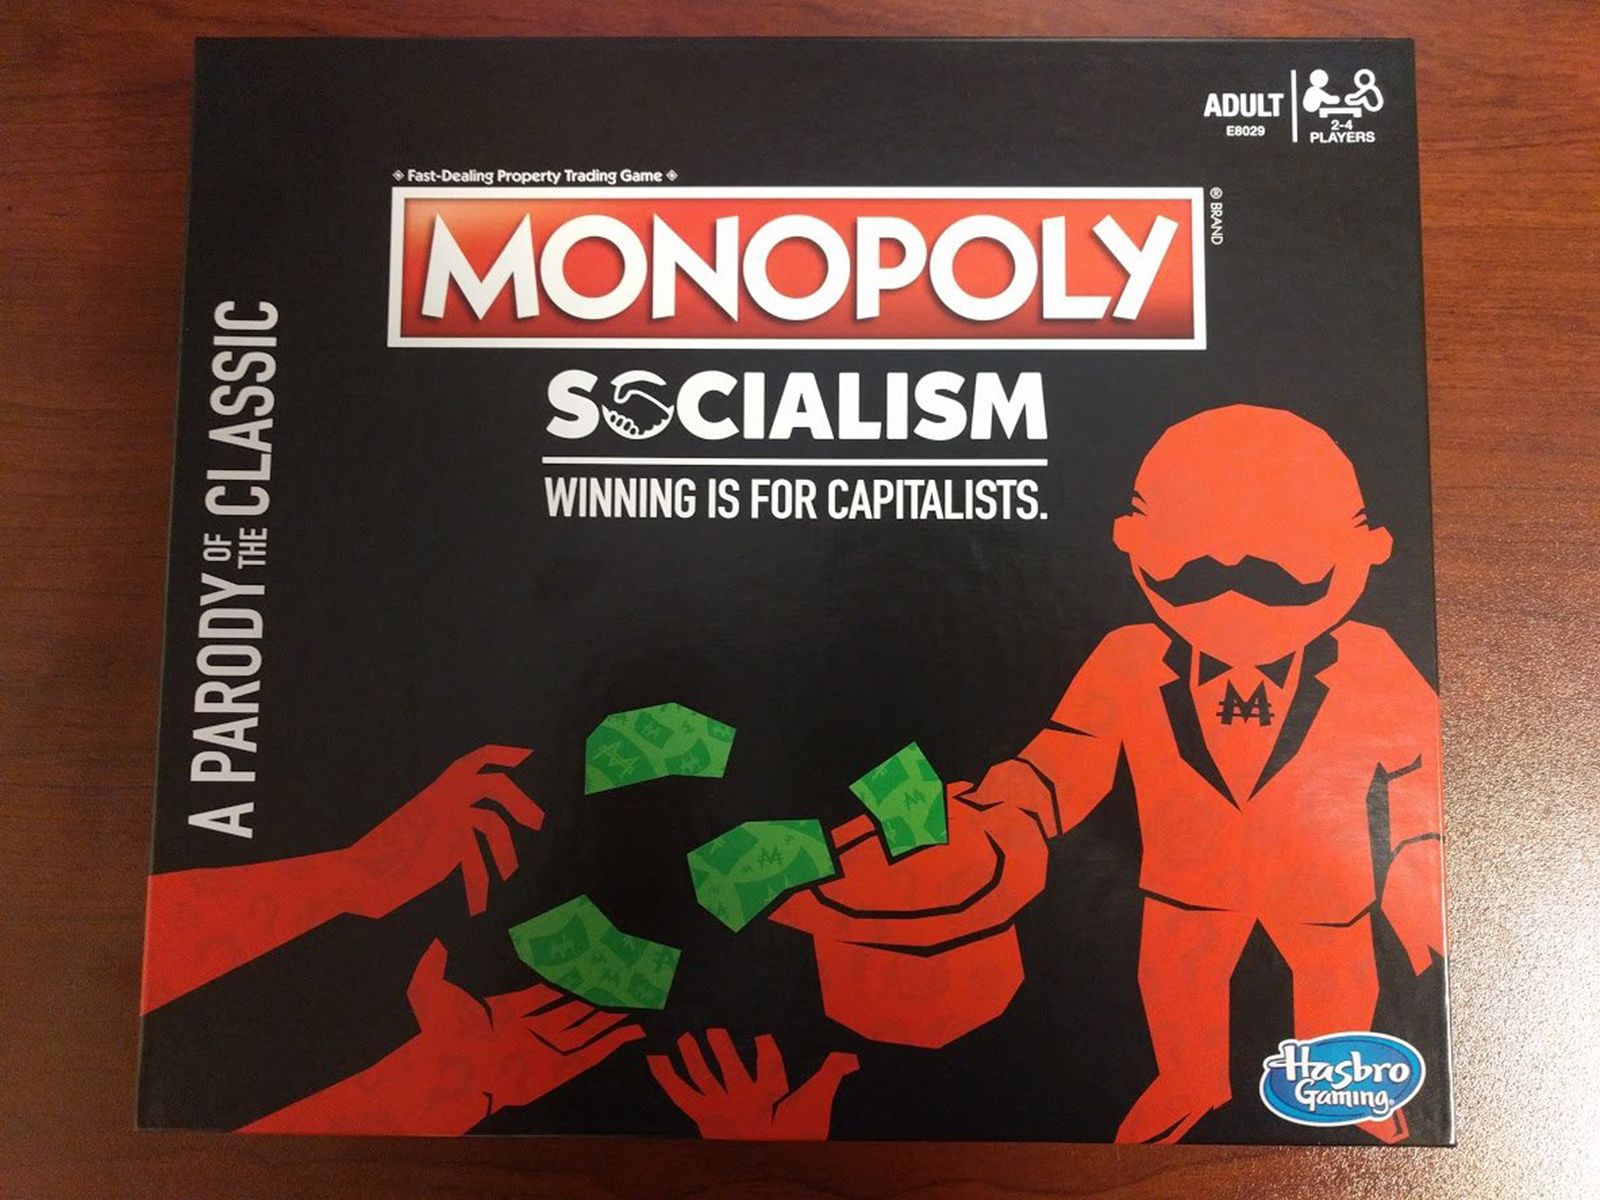 The Anti-Monopoly Board Game That Promoted a 'Soviet America' - Atlas  Obscura